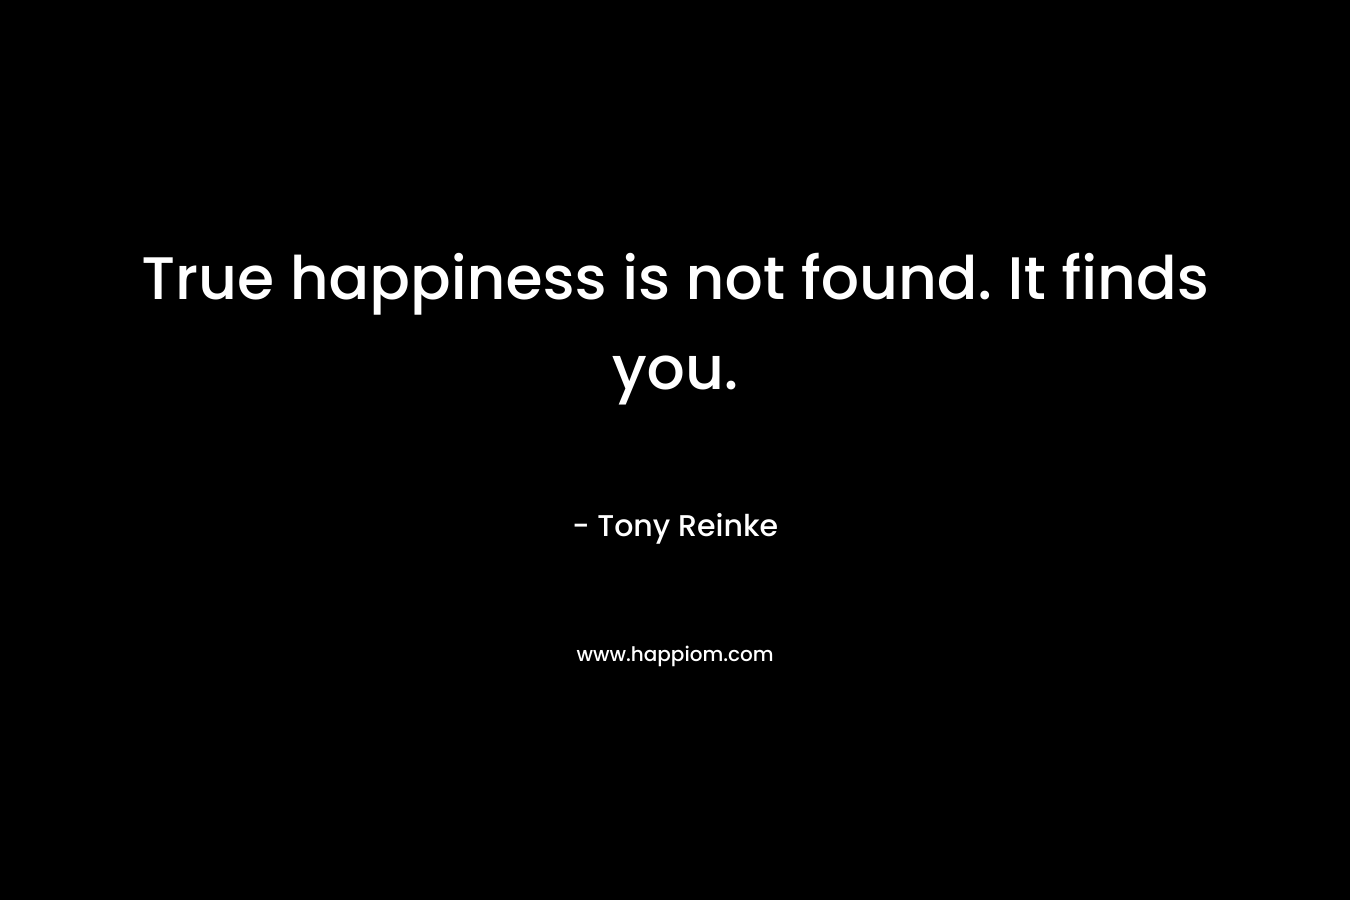 True happiness is not found. It finds you. – Tony Reinke